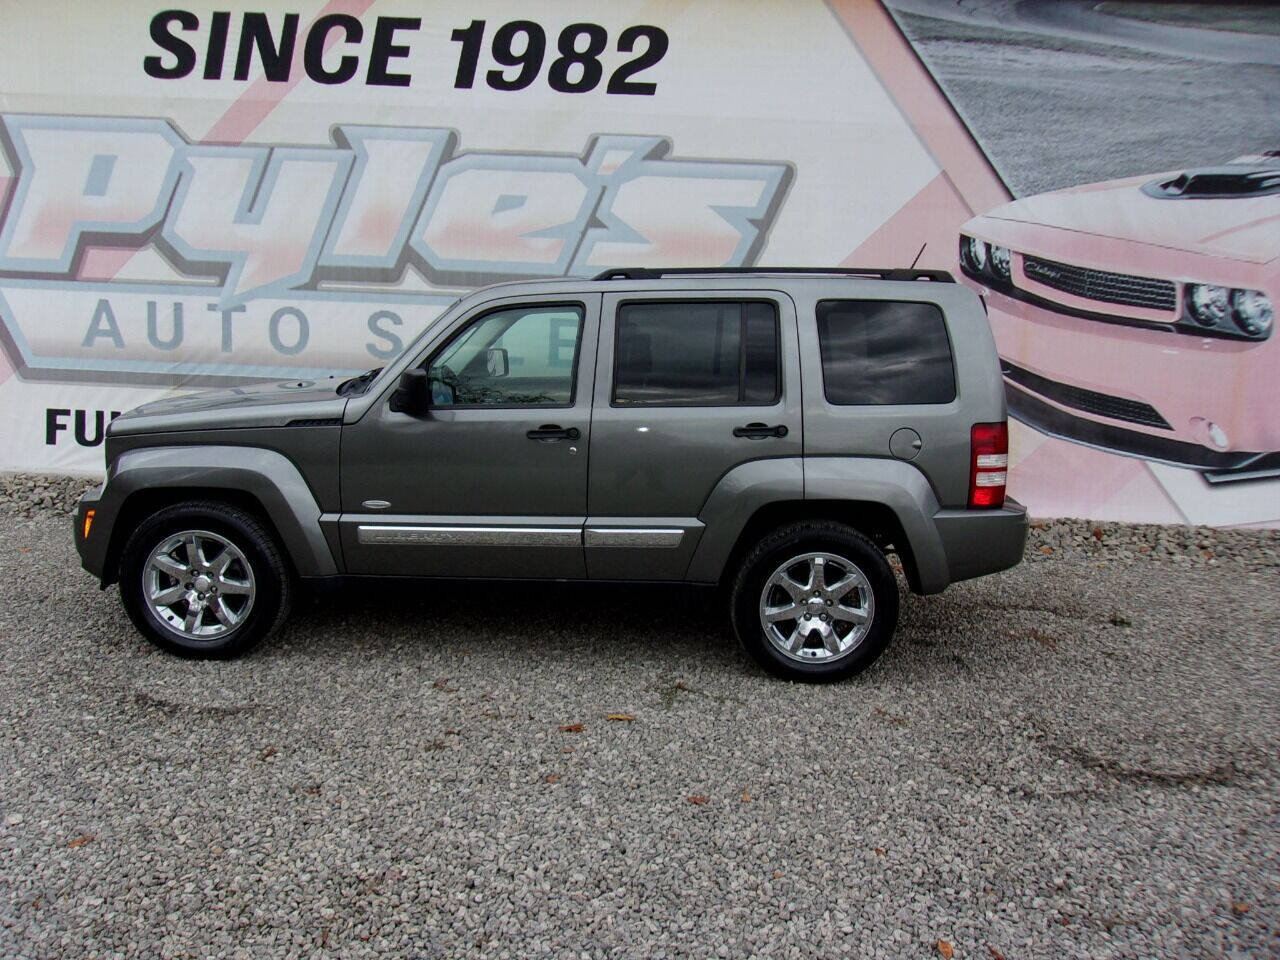 Jeep Liberty For Sale In Weirton, WV - Carsforsale.com®